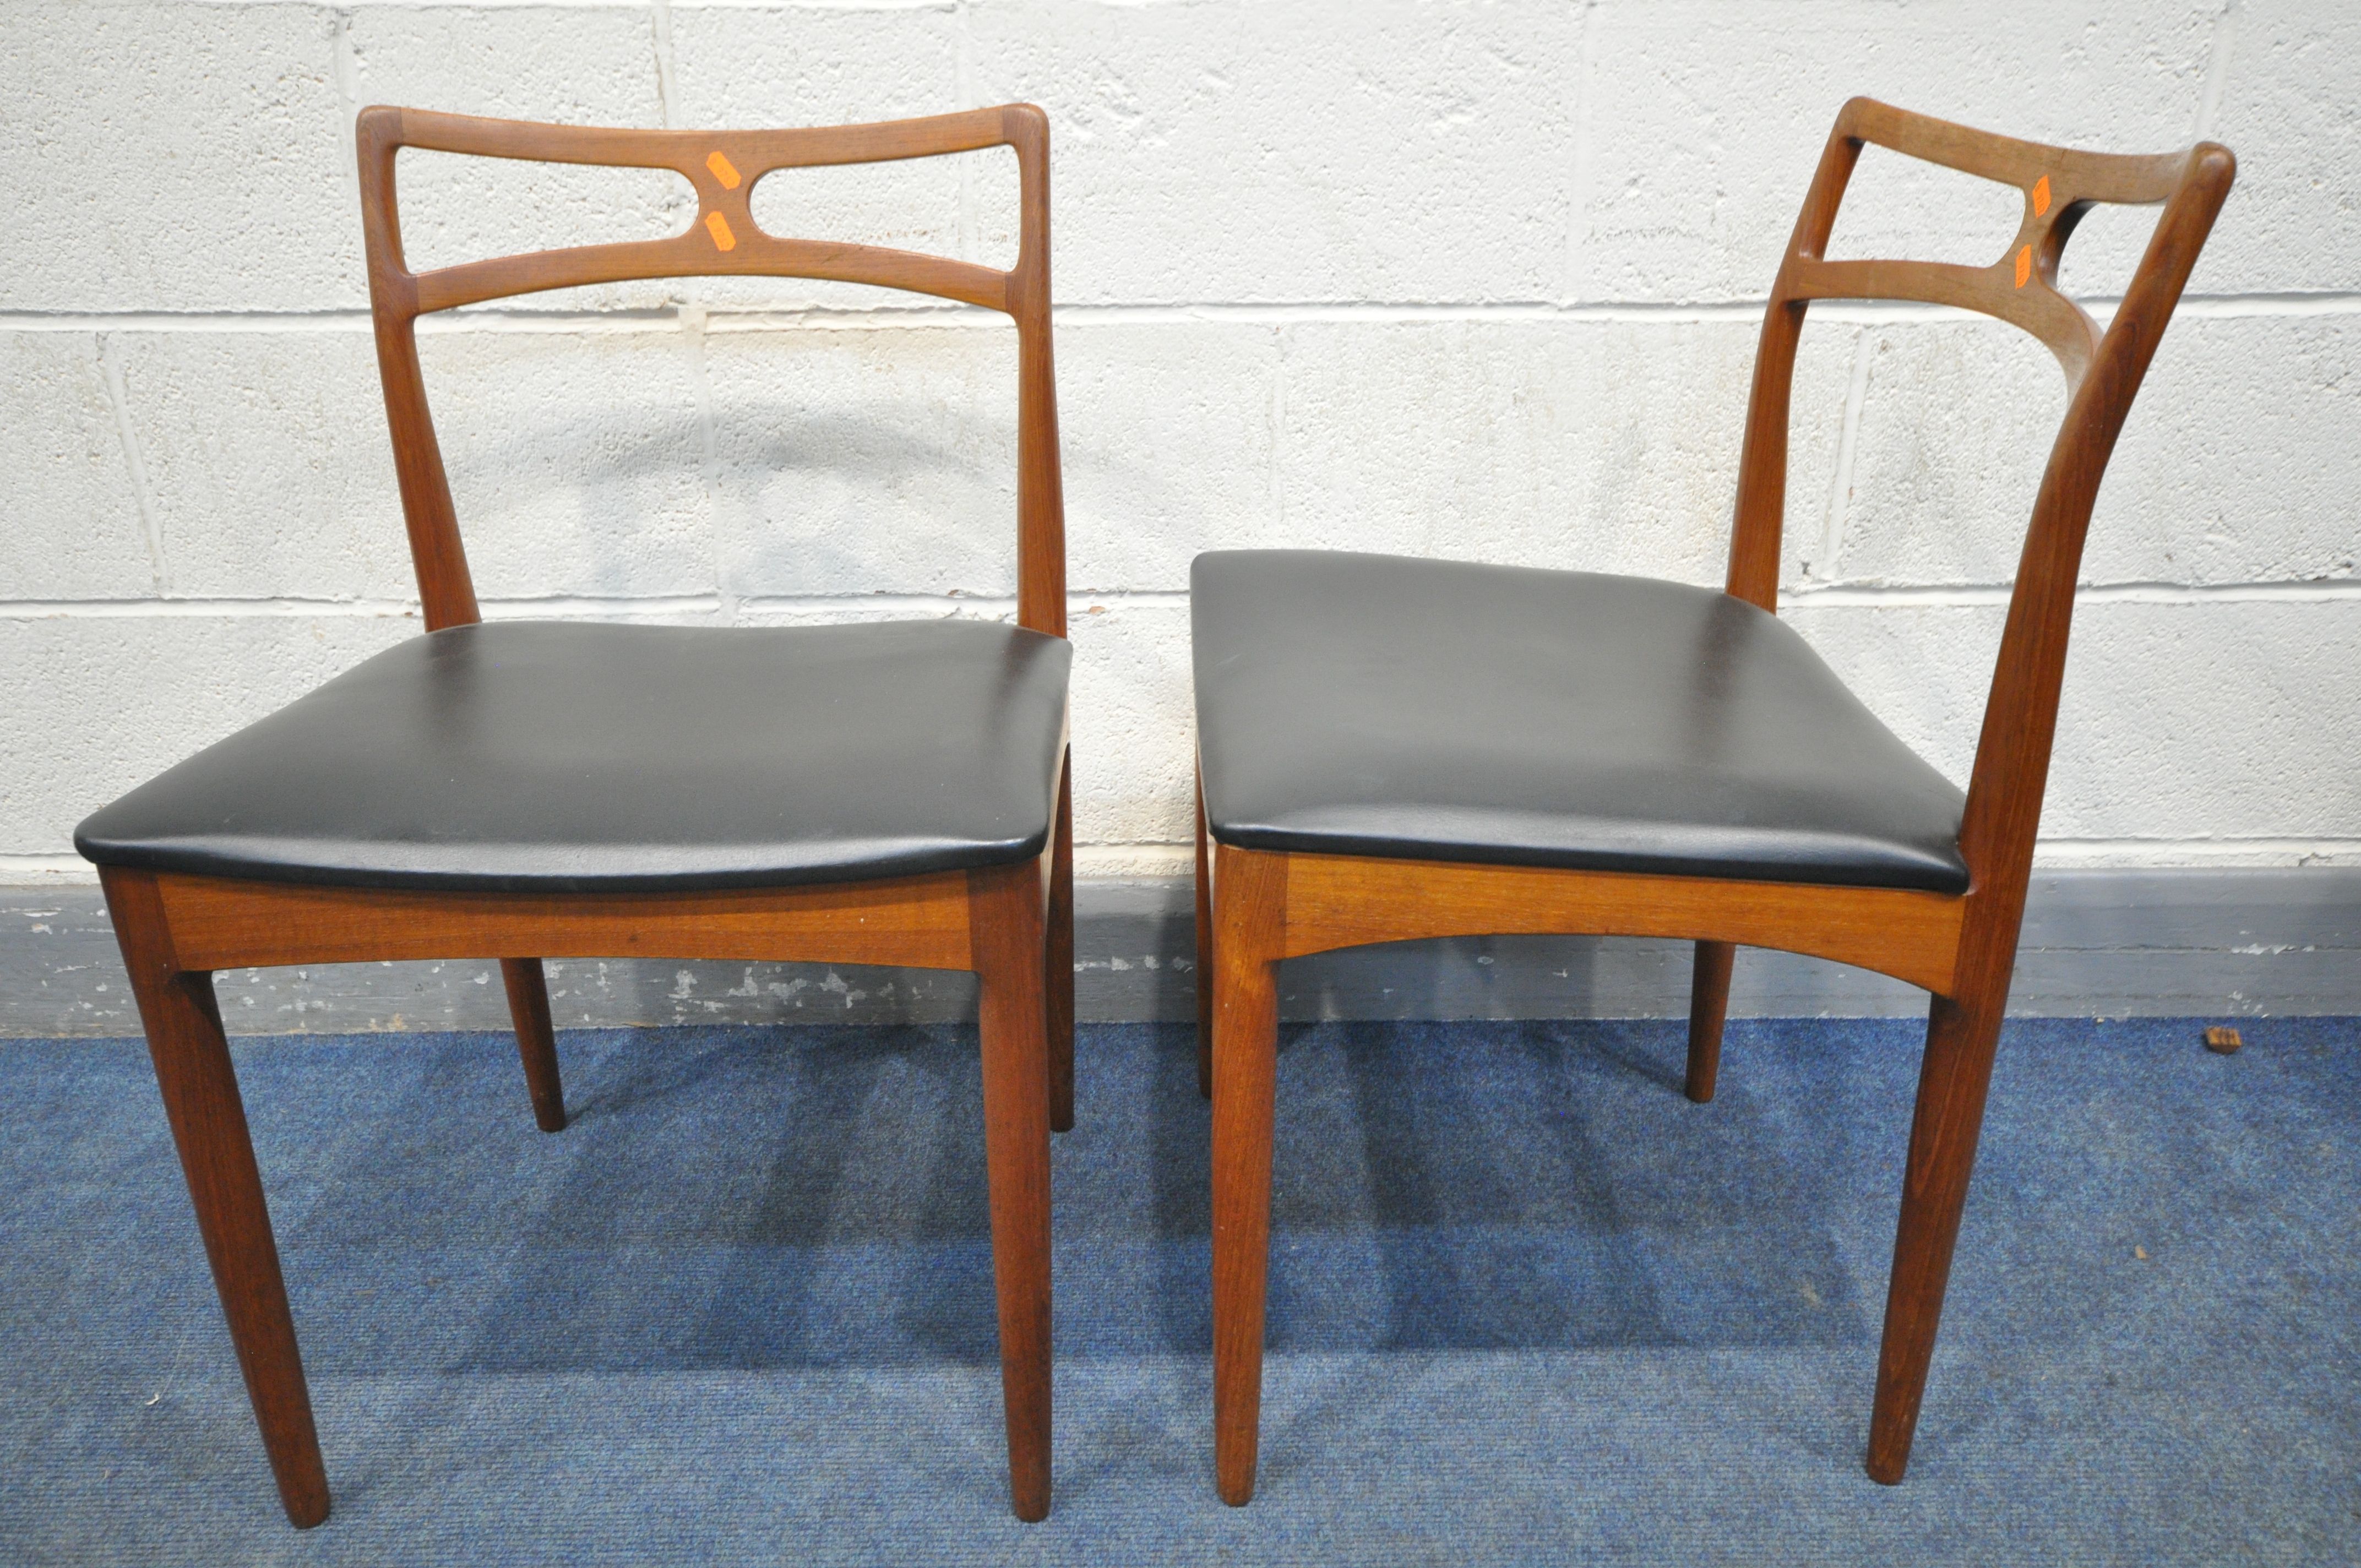 JOHANNES ANDERSEN FOR CHRISTIAN LINNEBERGS MØBELFABRIK, a set of six Danish teak dining chairs, with - Image 3 of 9